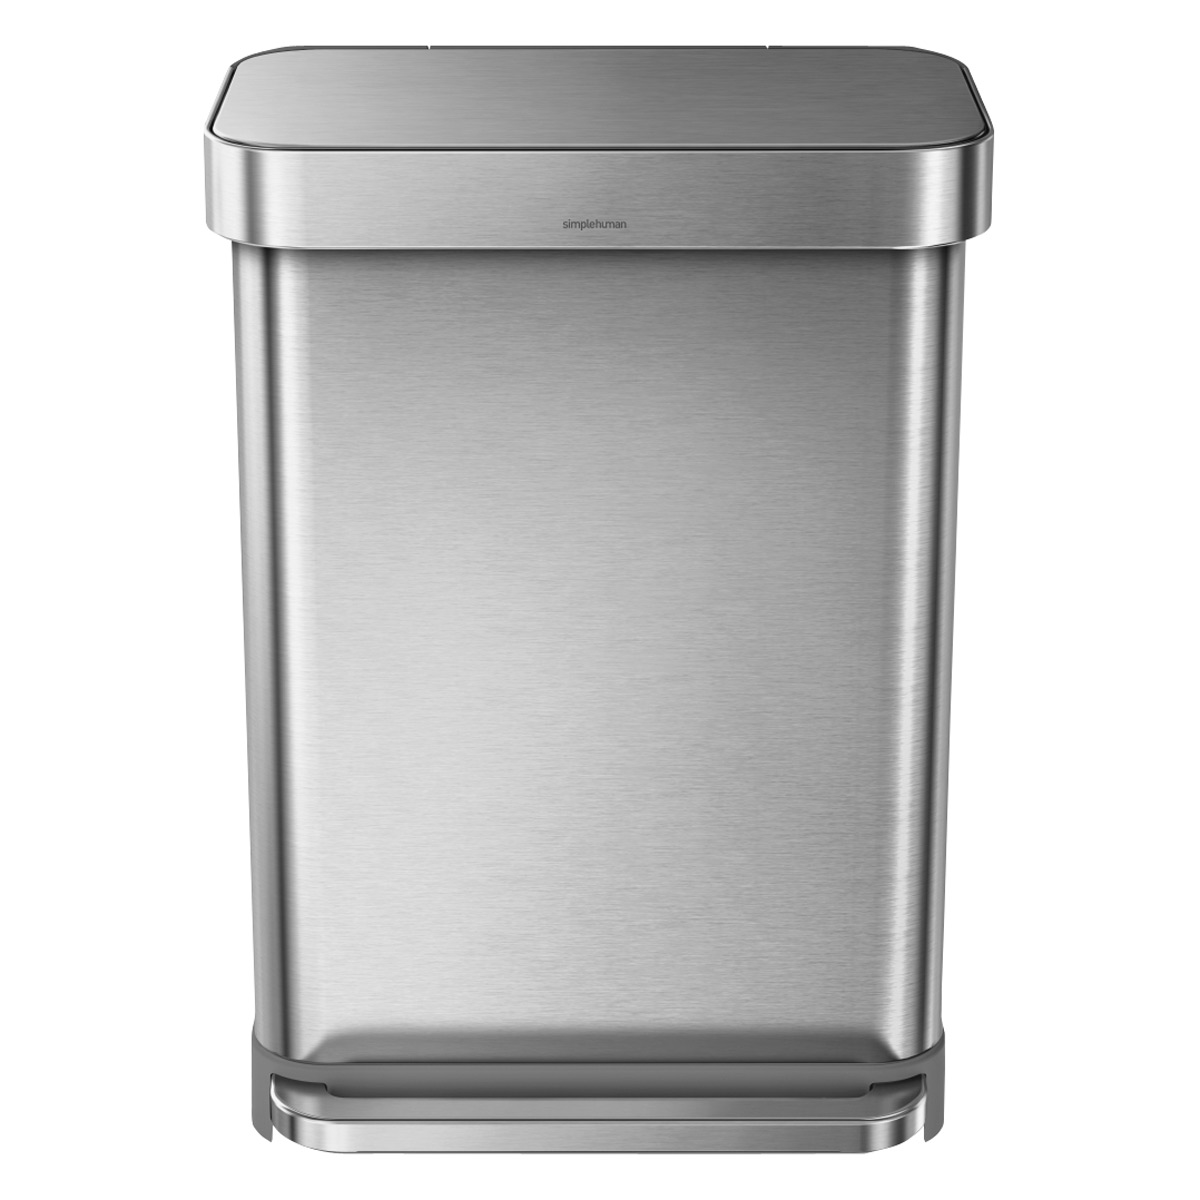 simplehuman 55L Rectangular Step Trash Can with Liner Pocket Brushed Stainless Steel